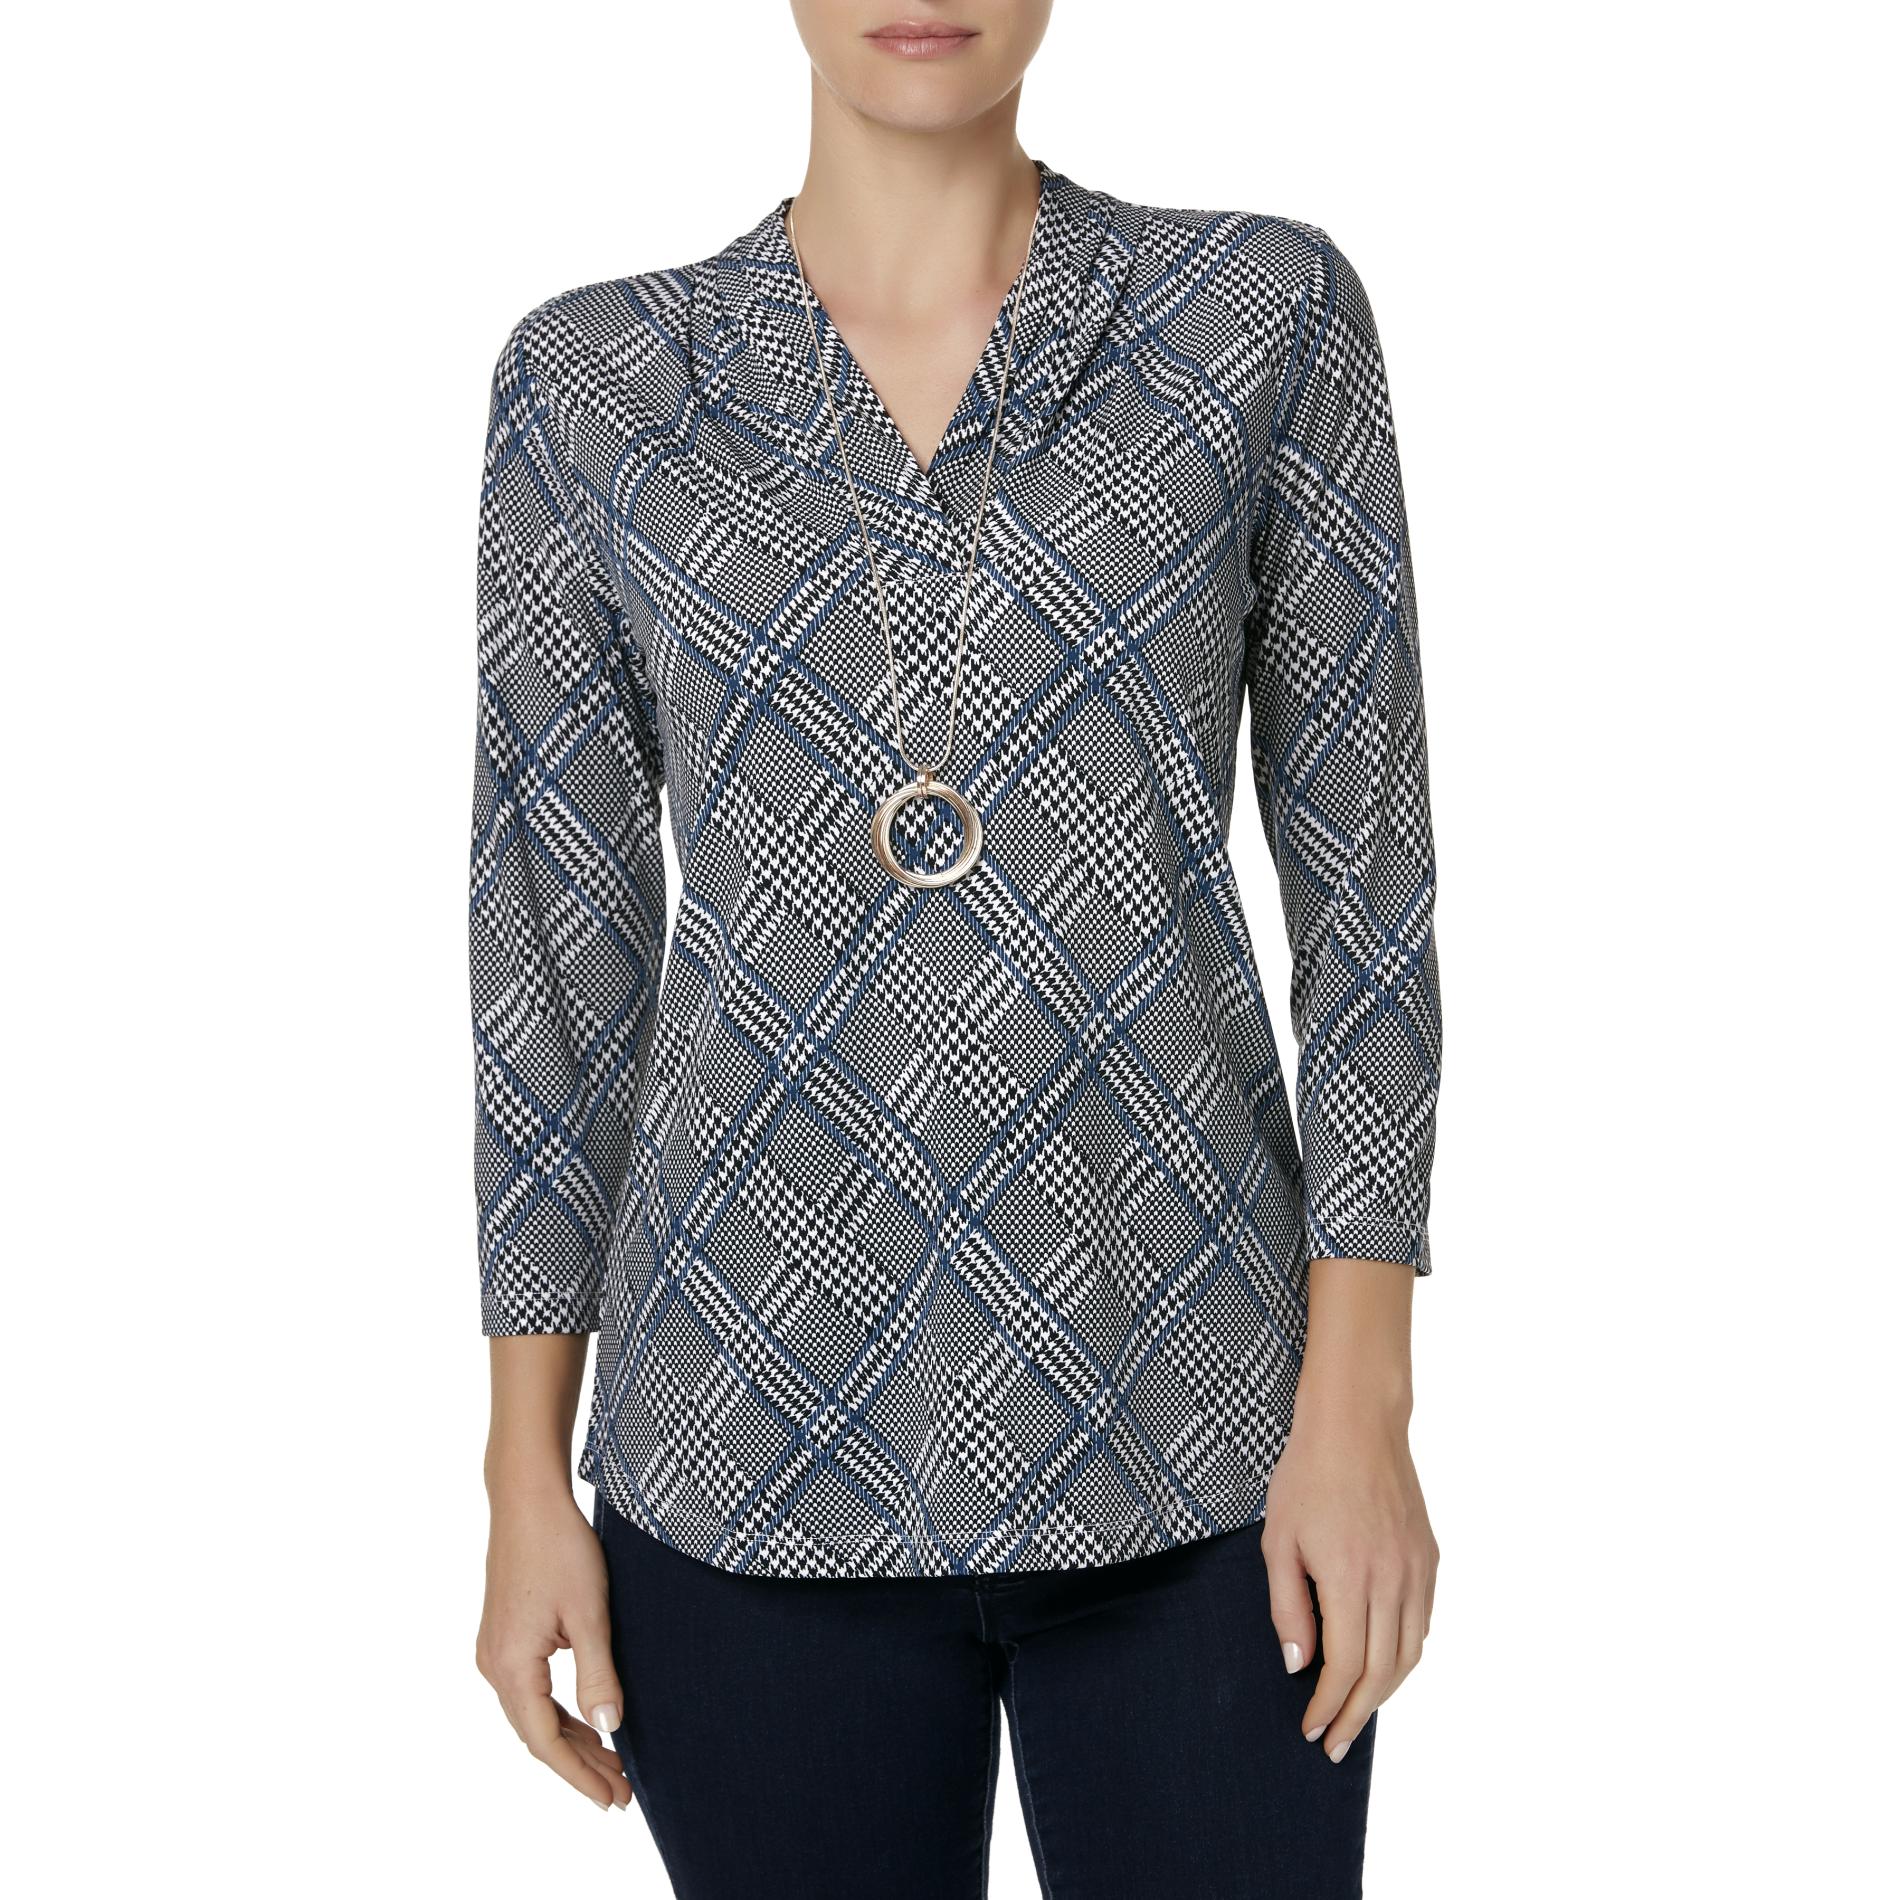 Jaclyn Smith Women's V-Neck Top - Houndstooth Checkered